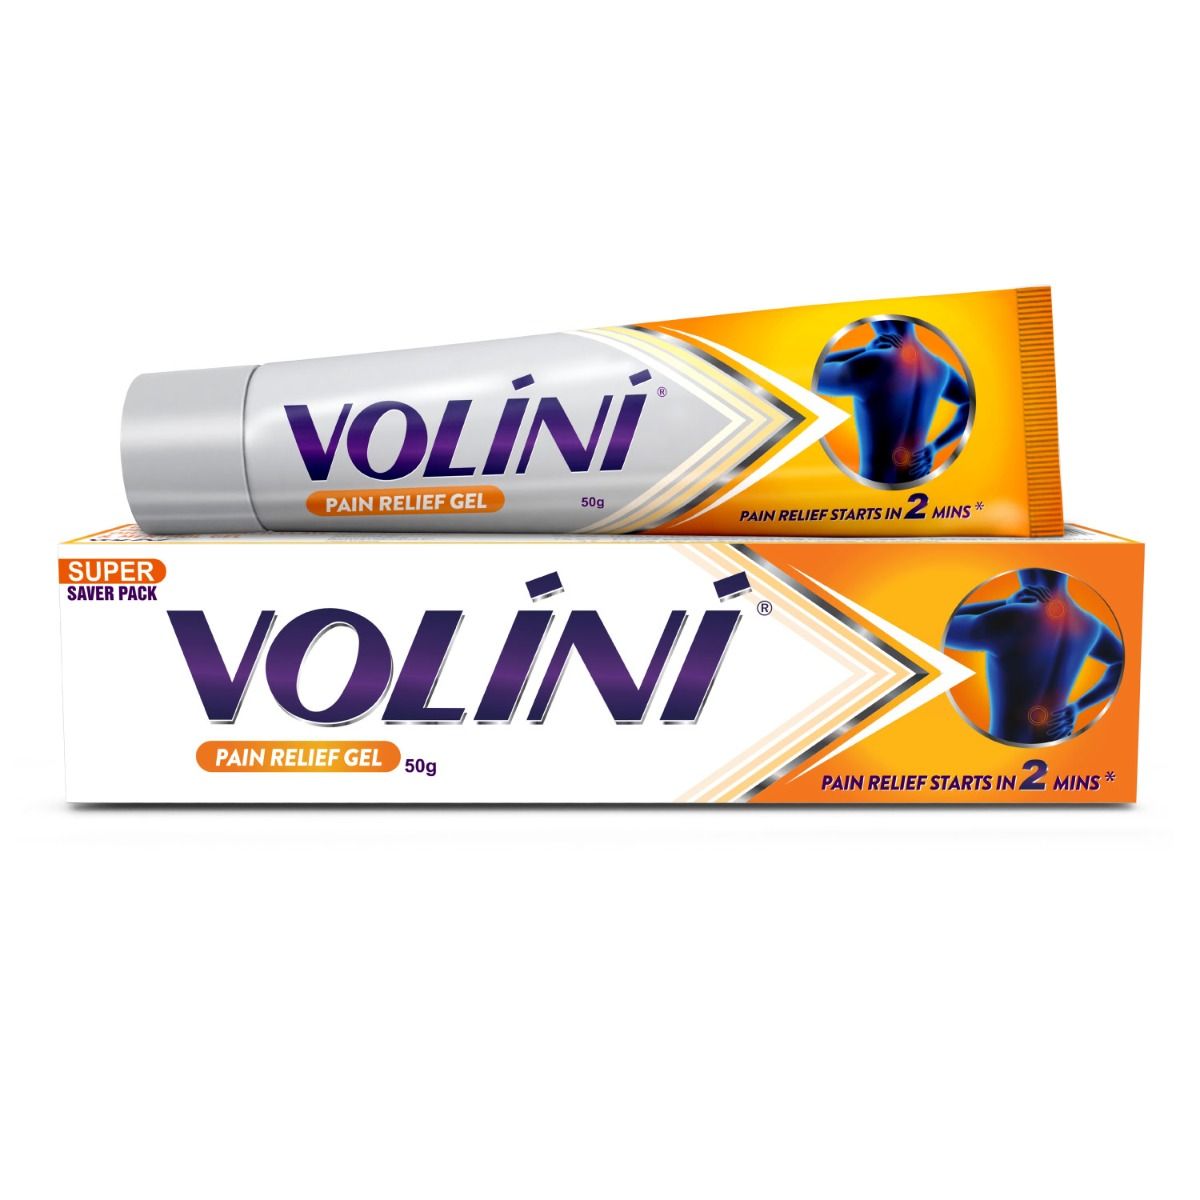 Volini Pain Relief Gel, 50 gm Price, Uses, Side Effects ...